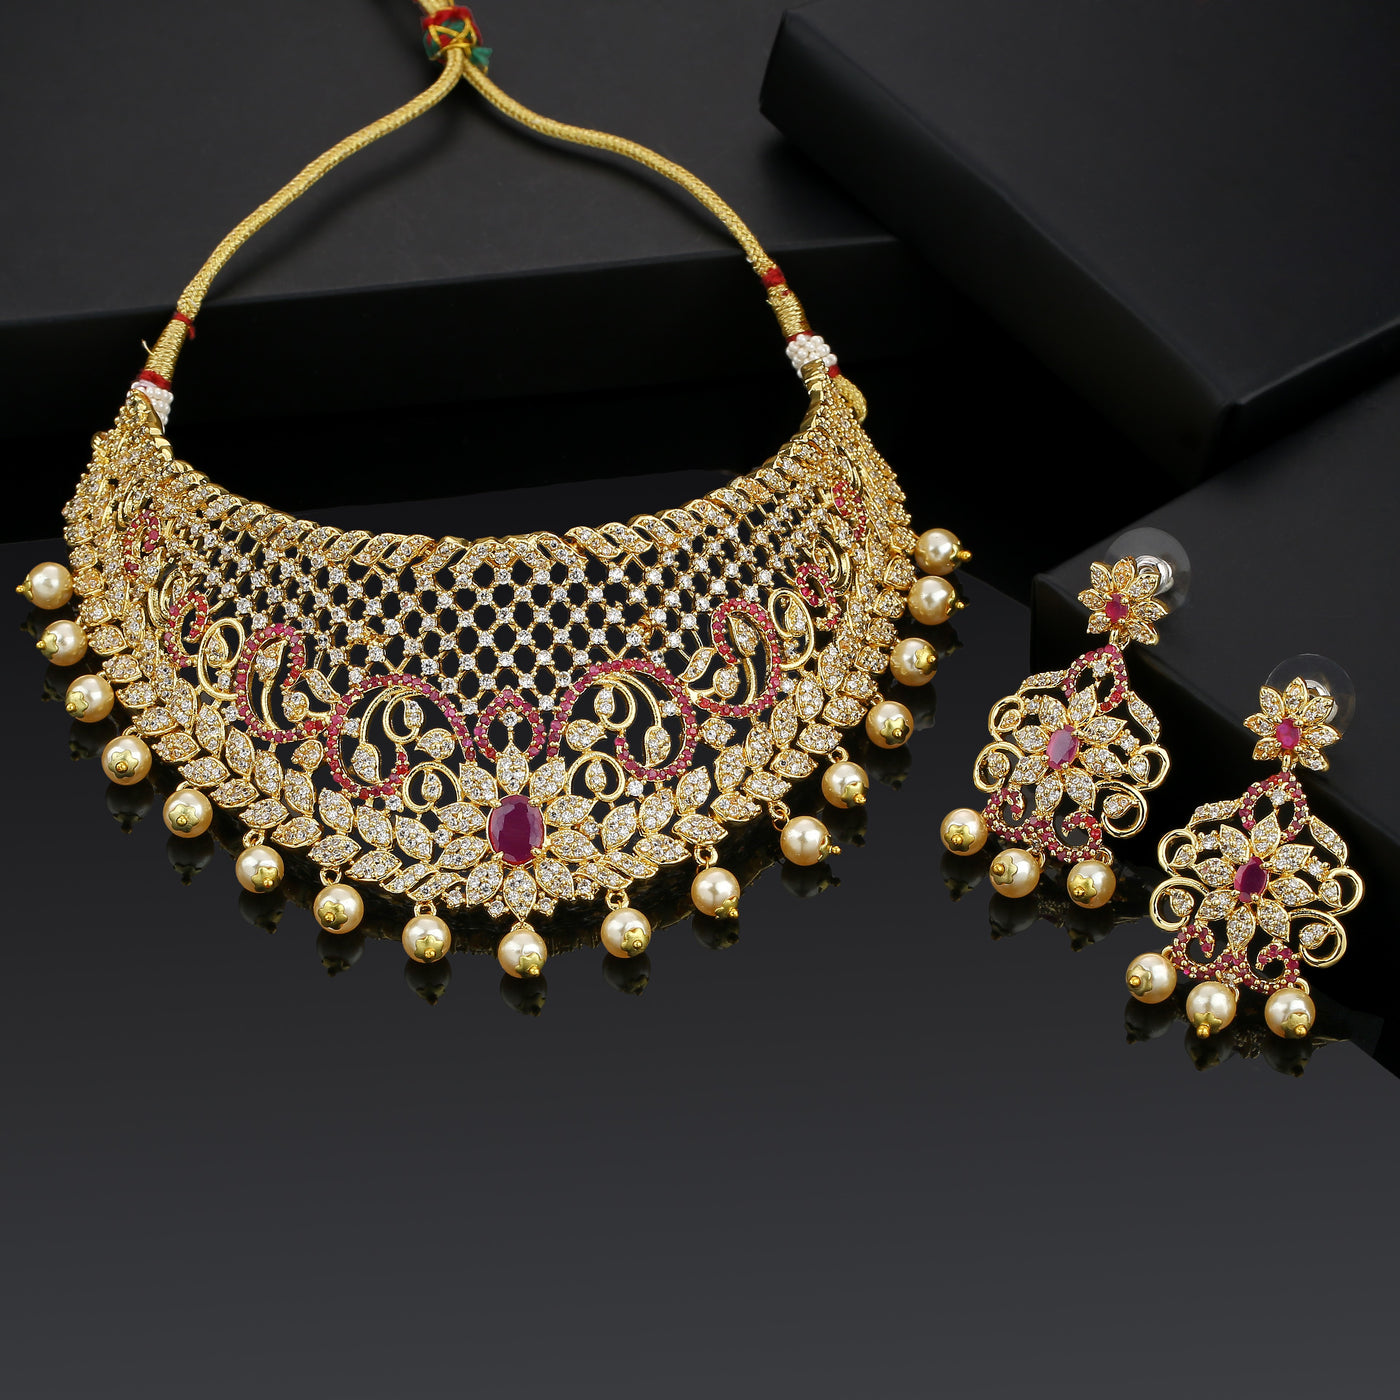 Estele Gold Plated CZ Bridal Choker Necklace Set with Red Crystals & Pearls for Women